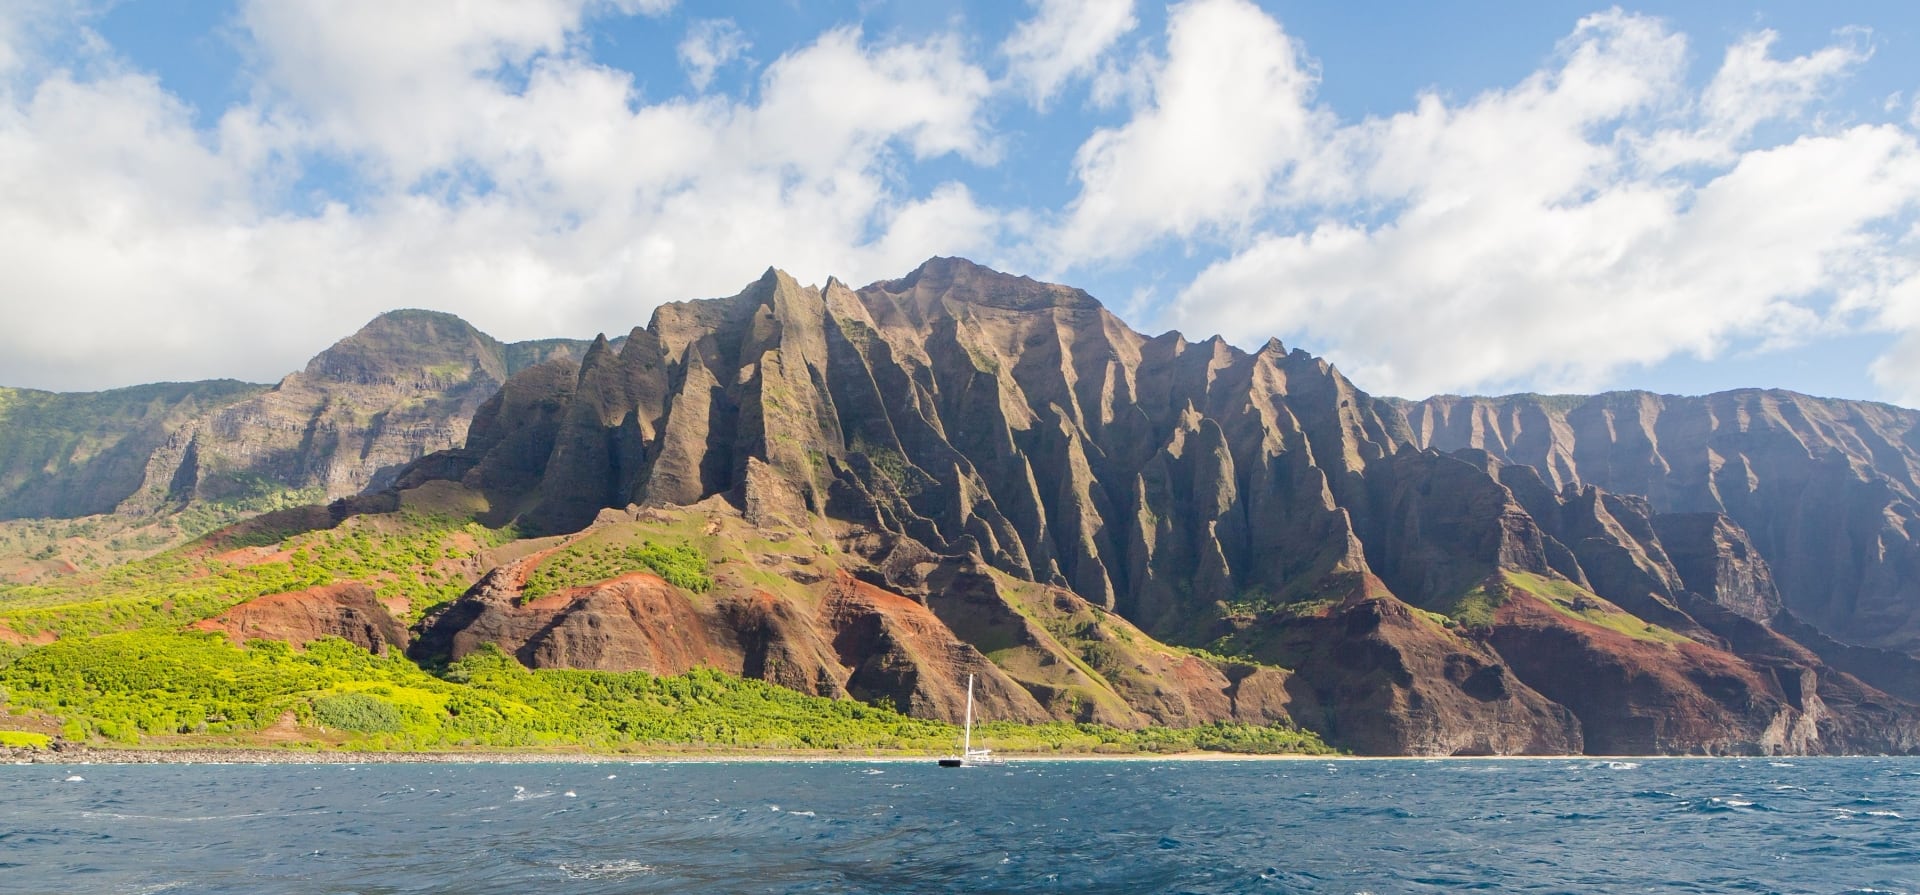 Stunning view of the Na Pali Coast with its lush, green cliffs